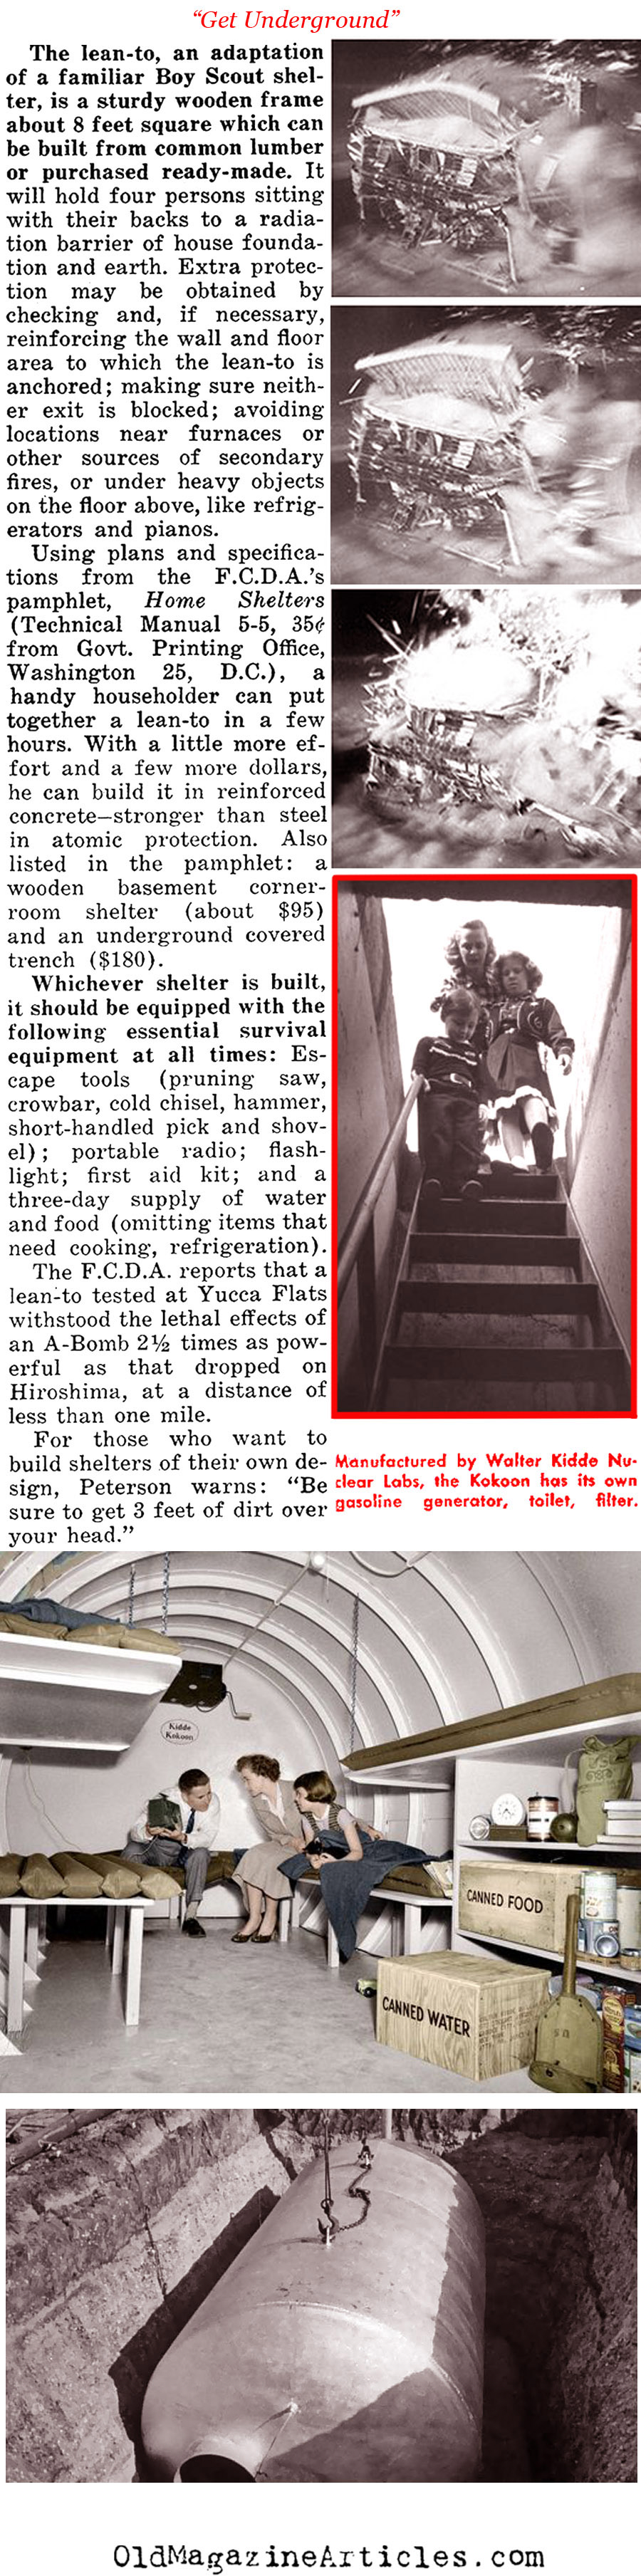 The Allure of the Private Bomb Shelter (People Today Magazine, 1955)